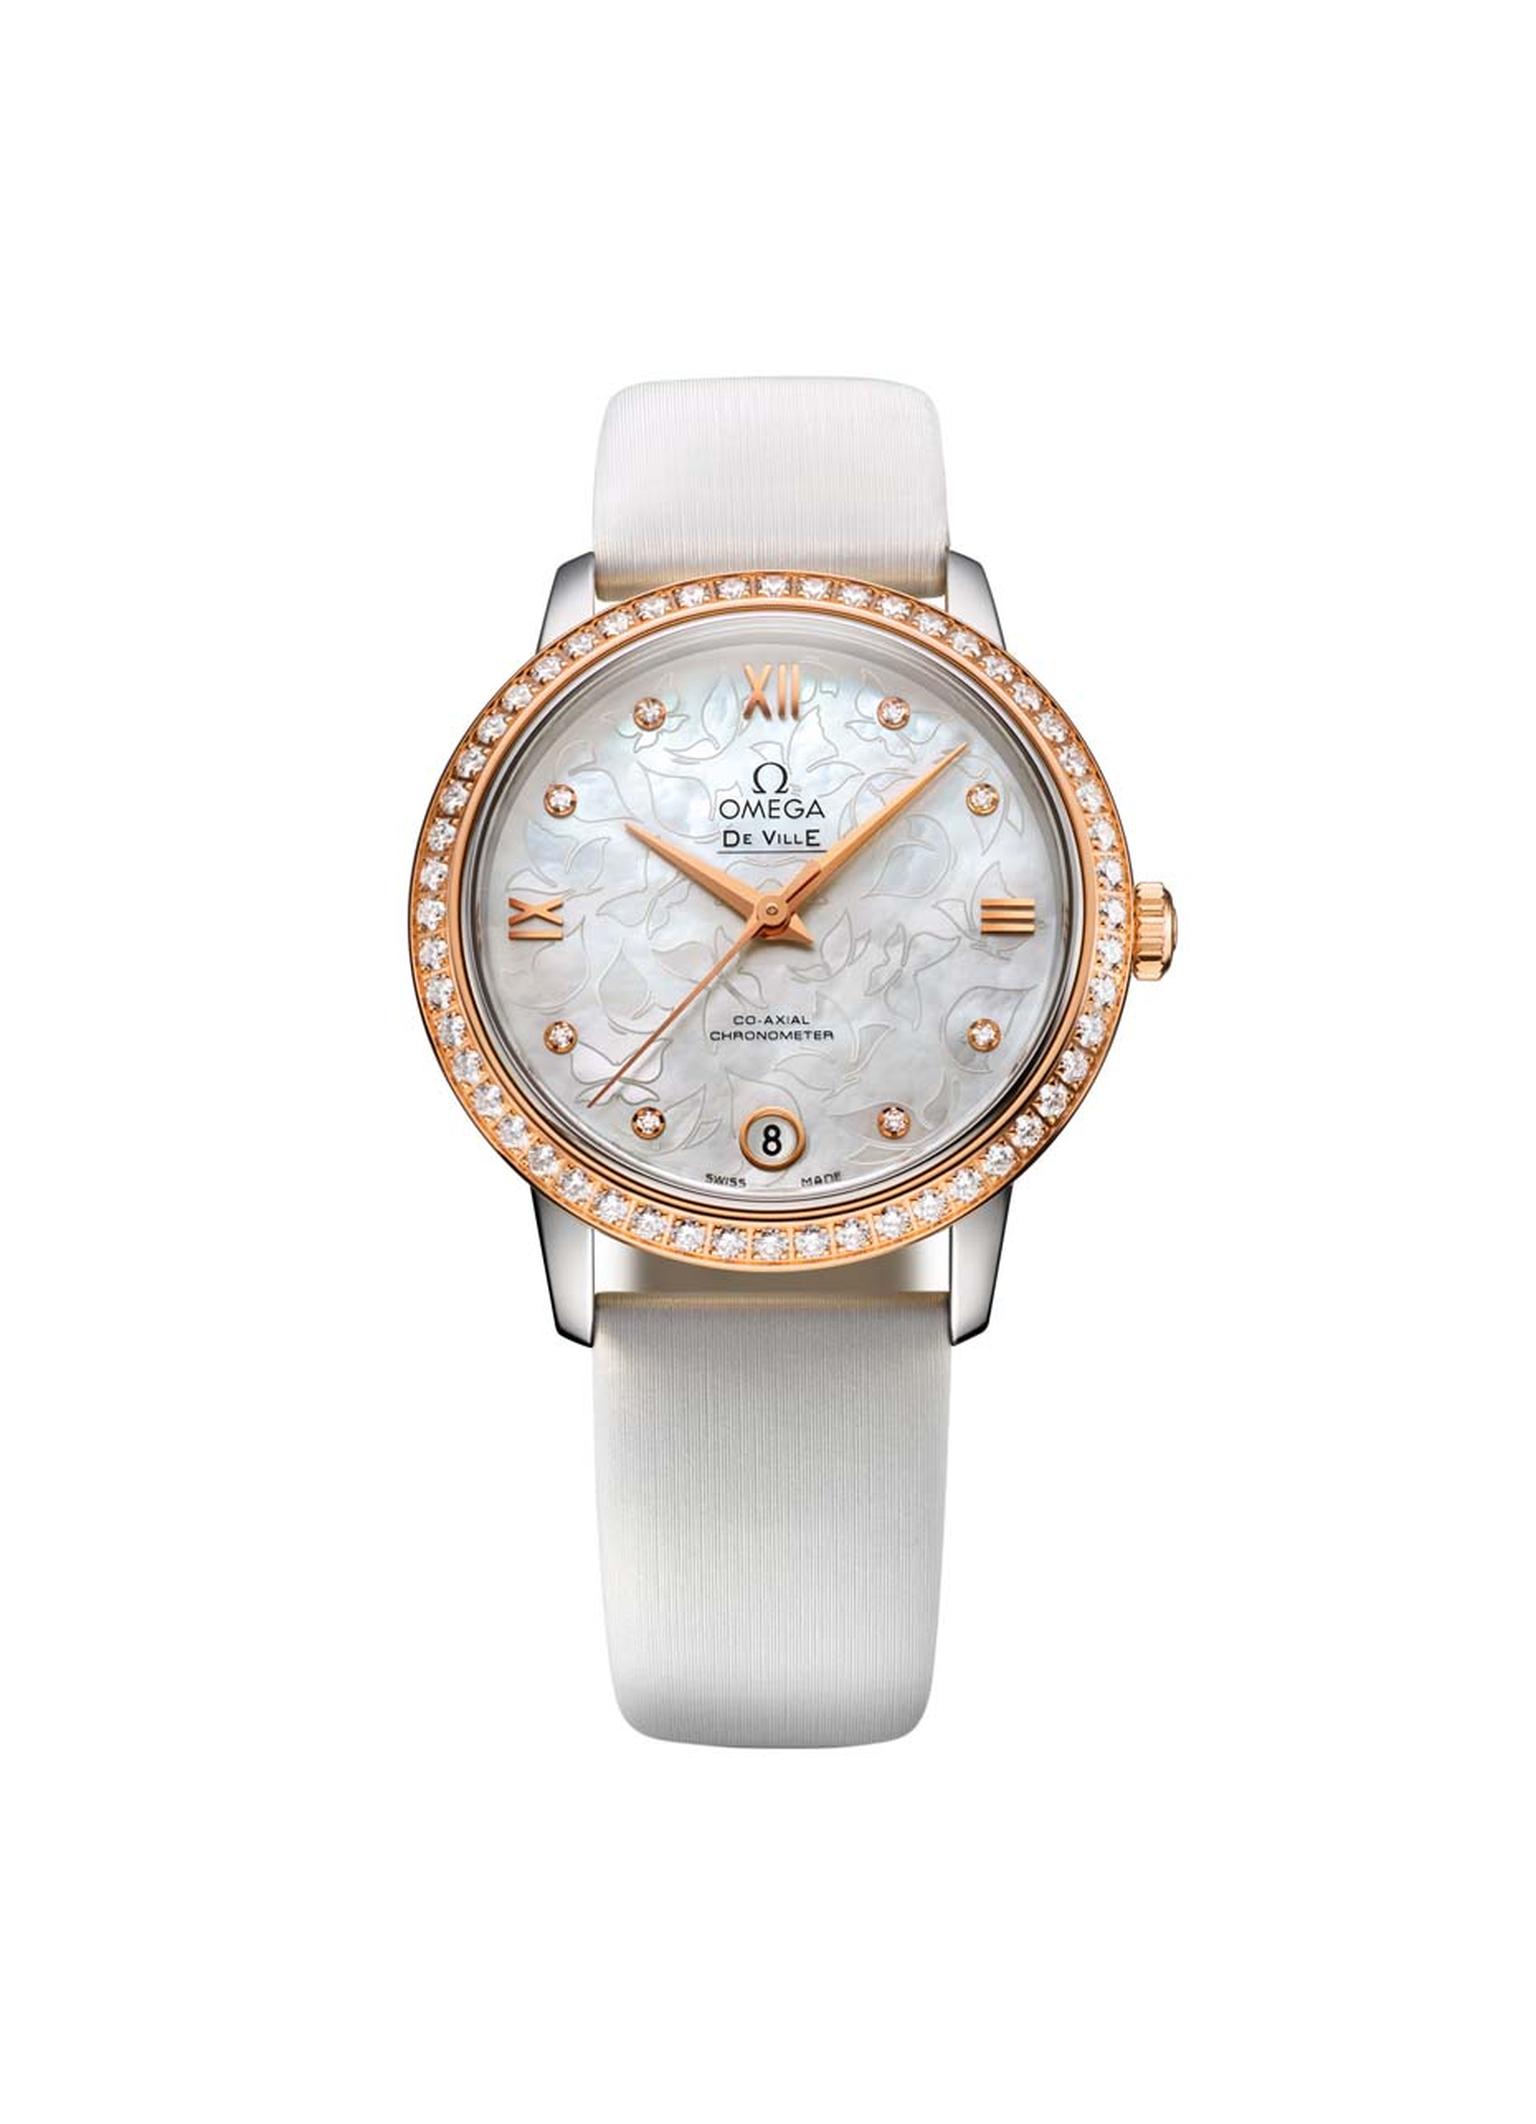 Graceful and feminine with its sprinkling of diamonds, white mother-of-pearl dial and butterfly pattern background, the Omega De Ville Prestige Butterfly watch features a 32.7mm case housing Omega’s famous Co-Axial calibre 2500, which is COSC-certified as